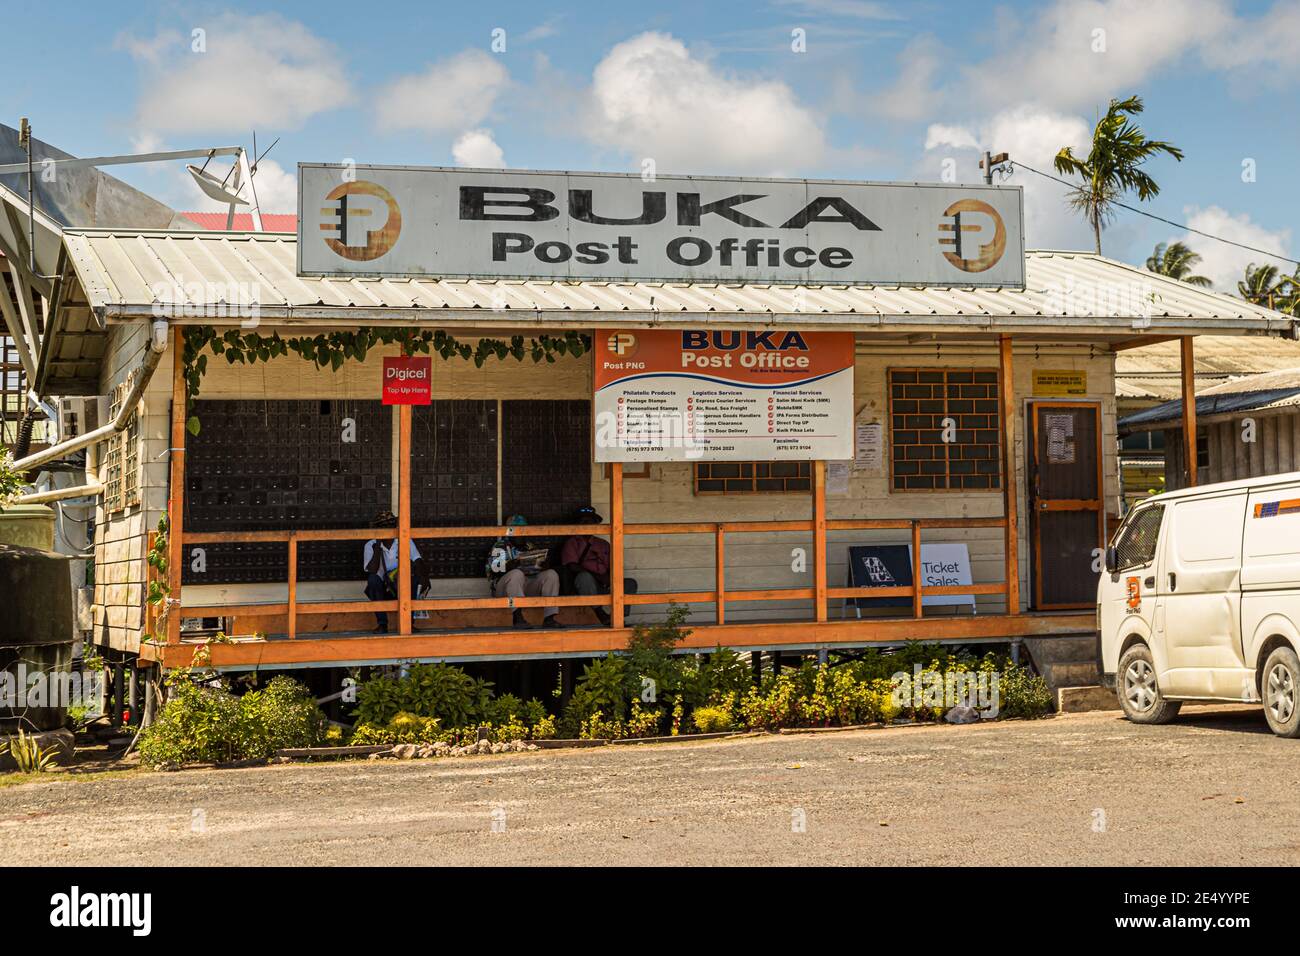 The post office building of Buka, the capital of Bougainville, Papua New Guinea Stock Photo